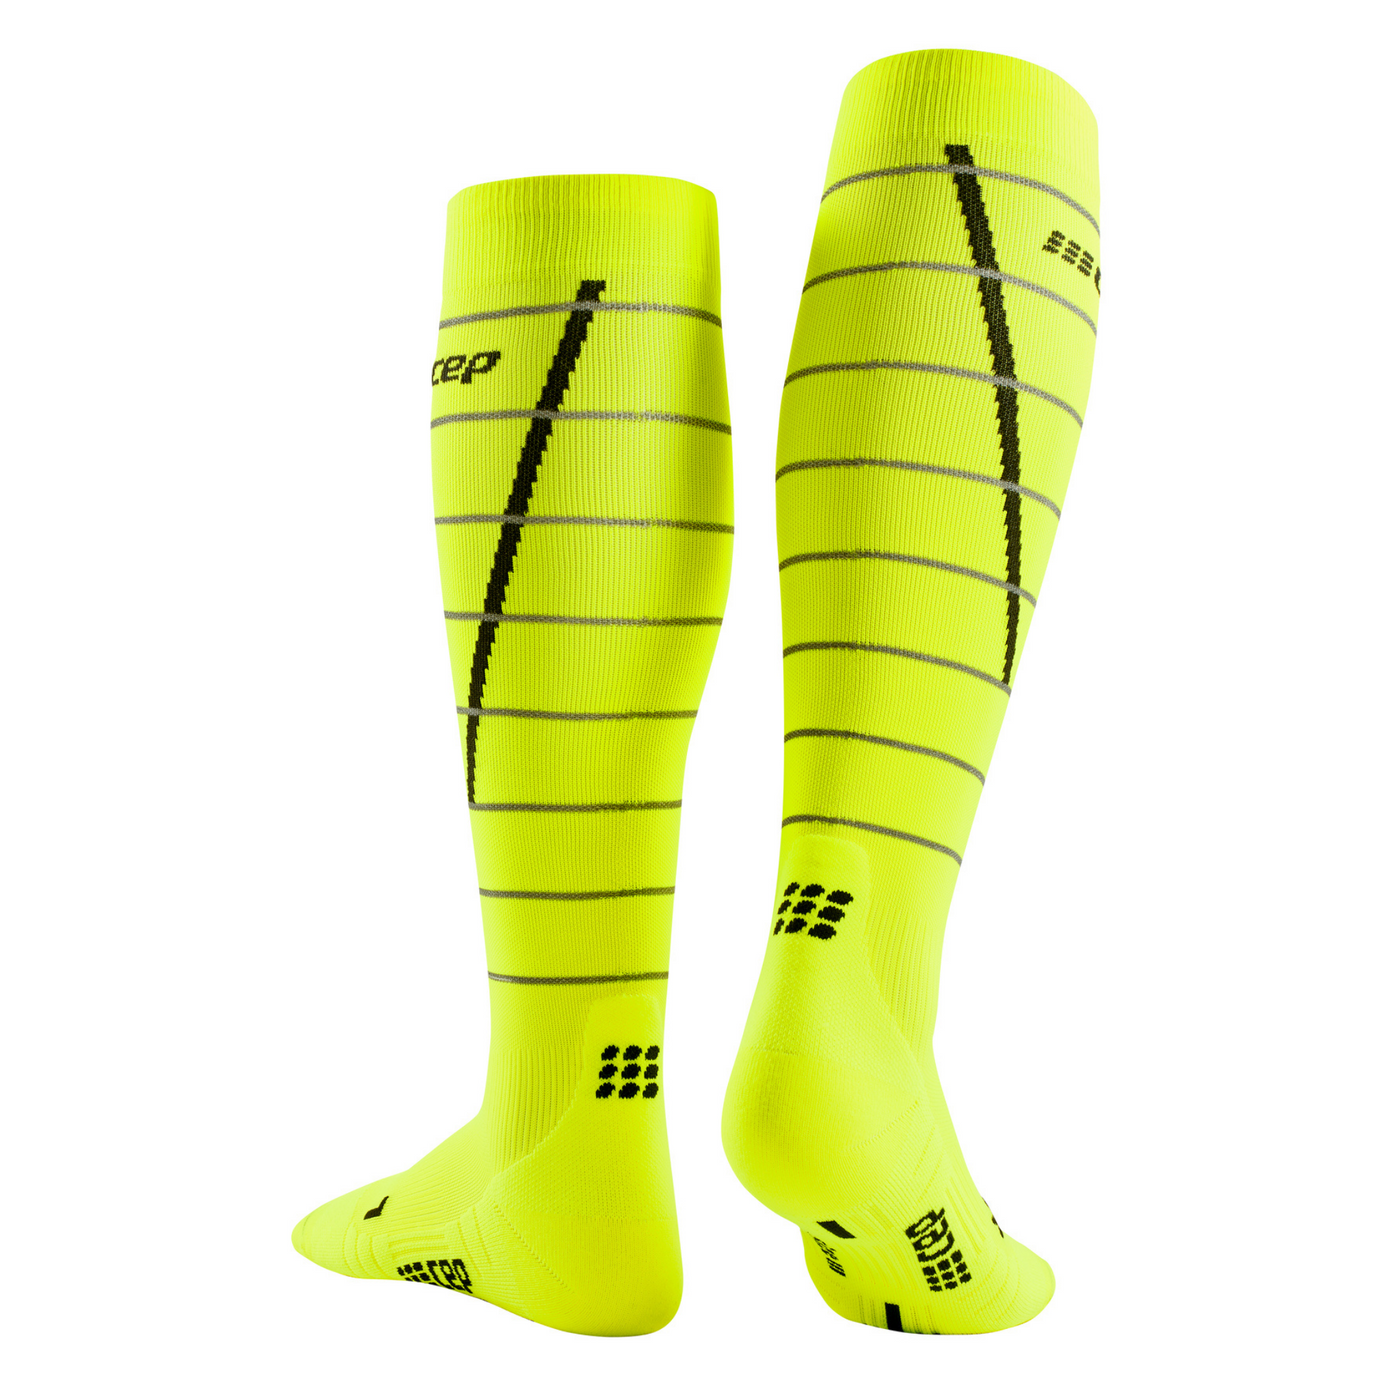 Reflective Tall Compression Socks, Women, Neon Yellow/Silver, Back View